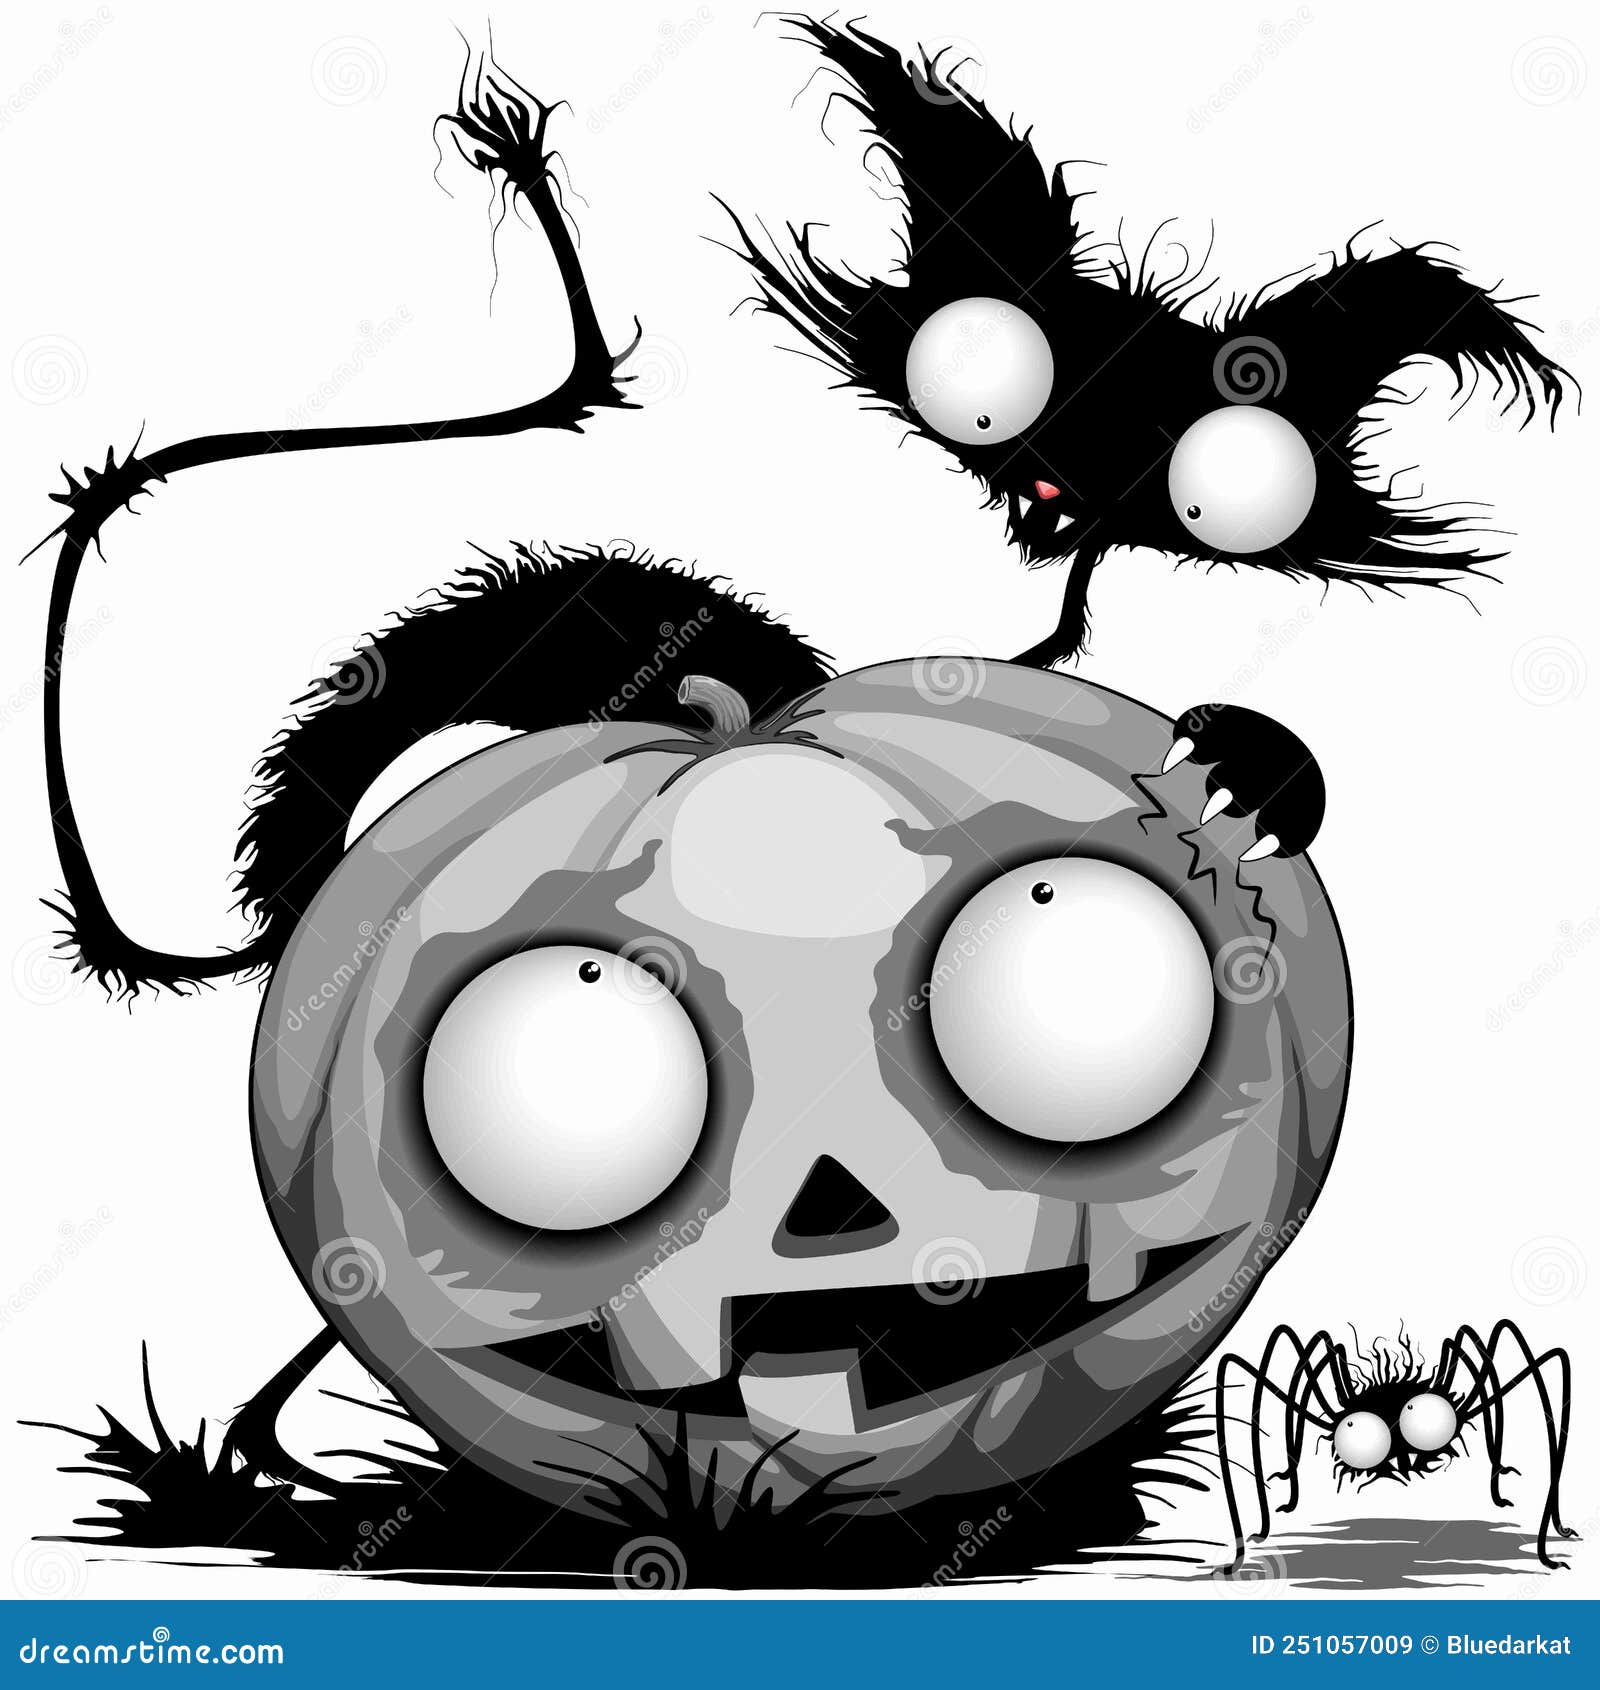 cat pumpkin and spider funny and spooky halloween cartoon characters  